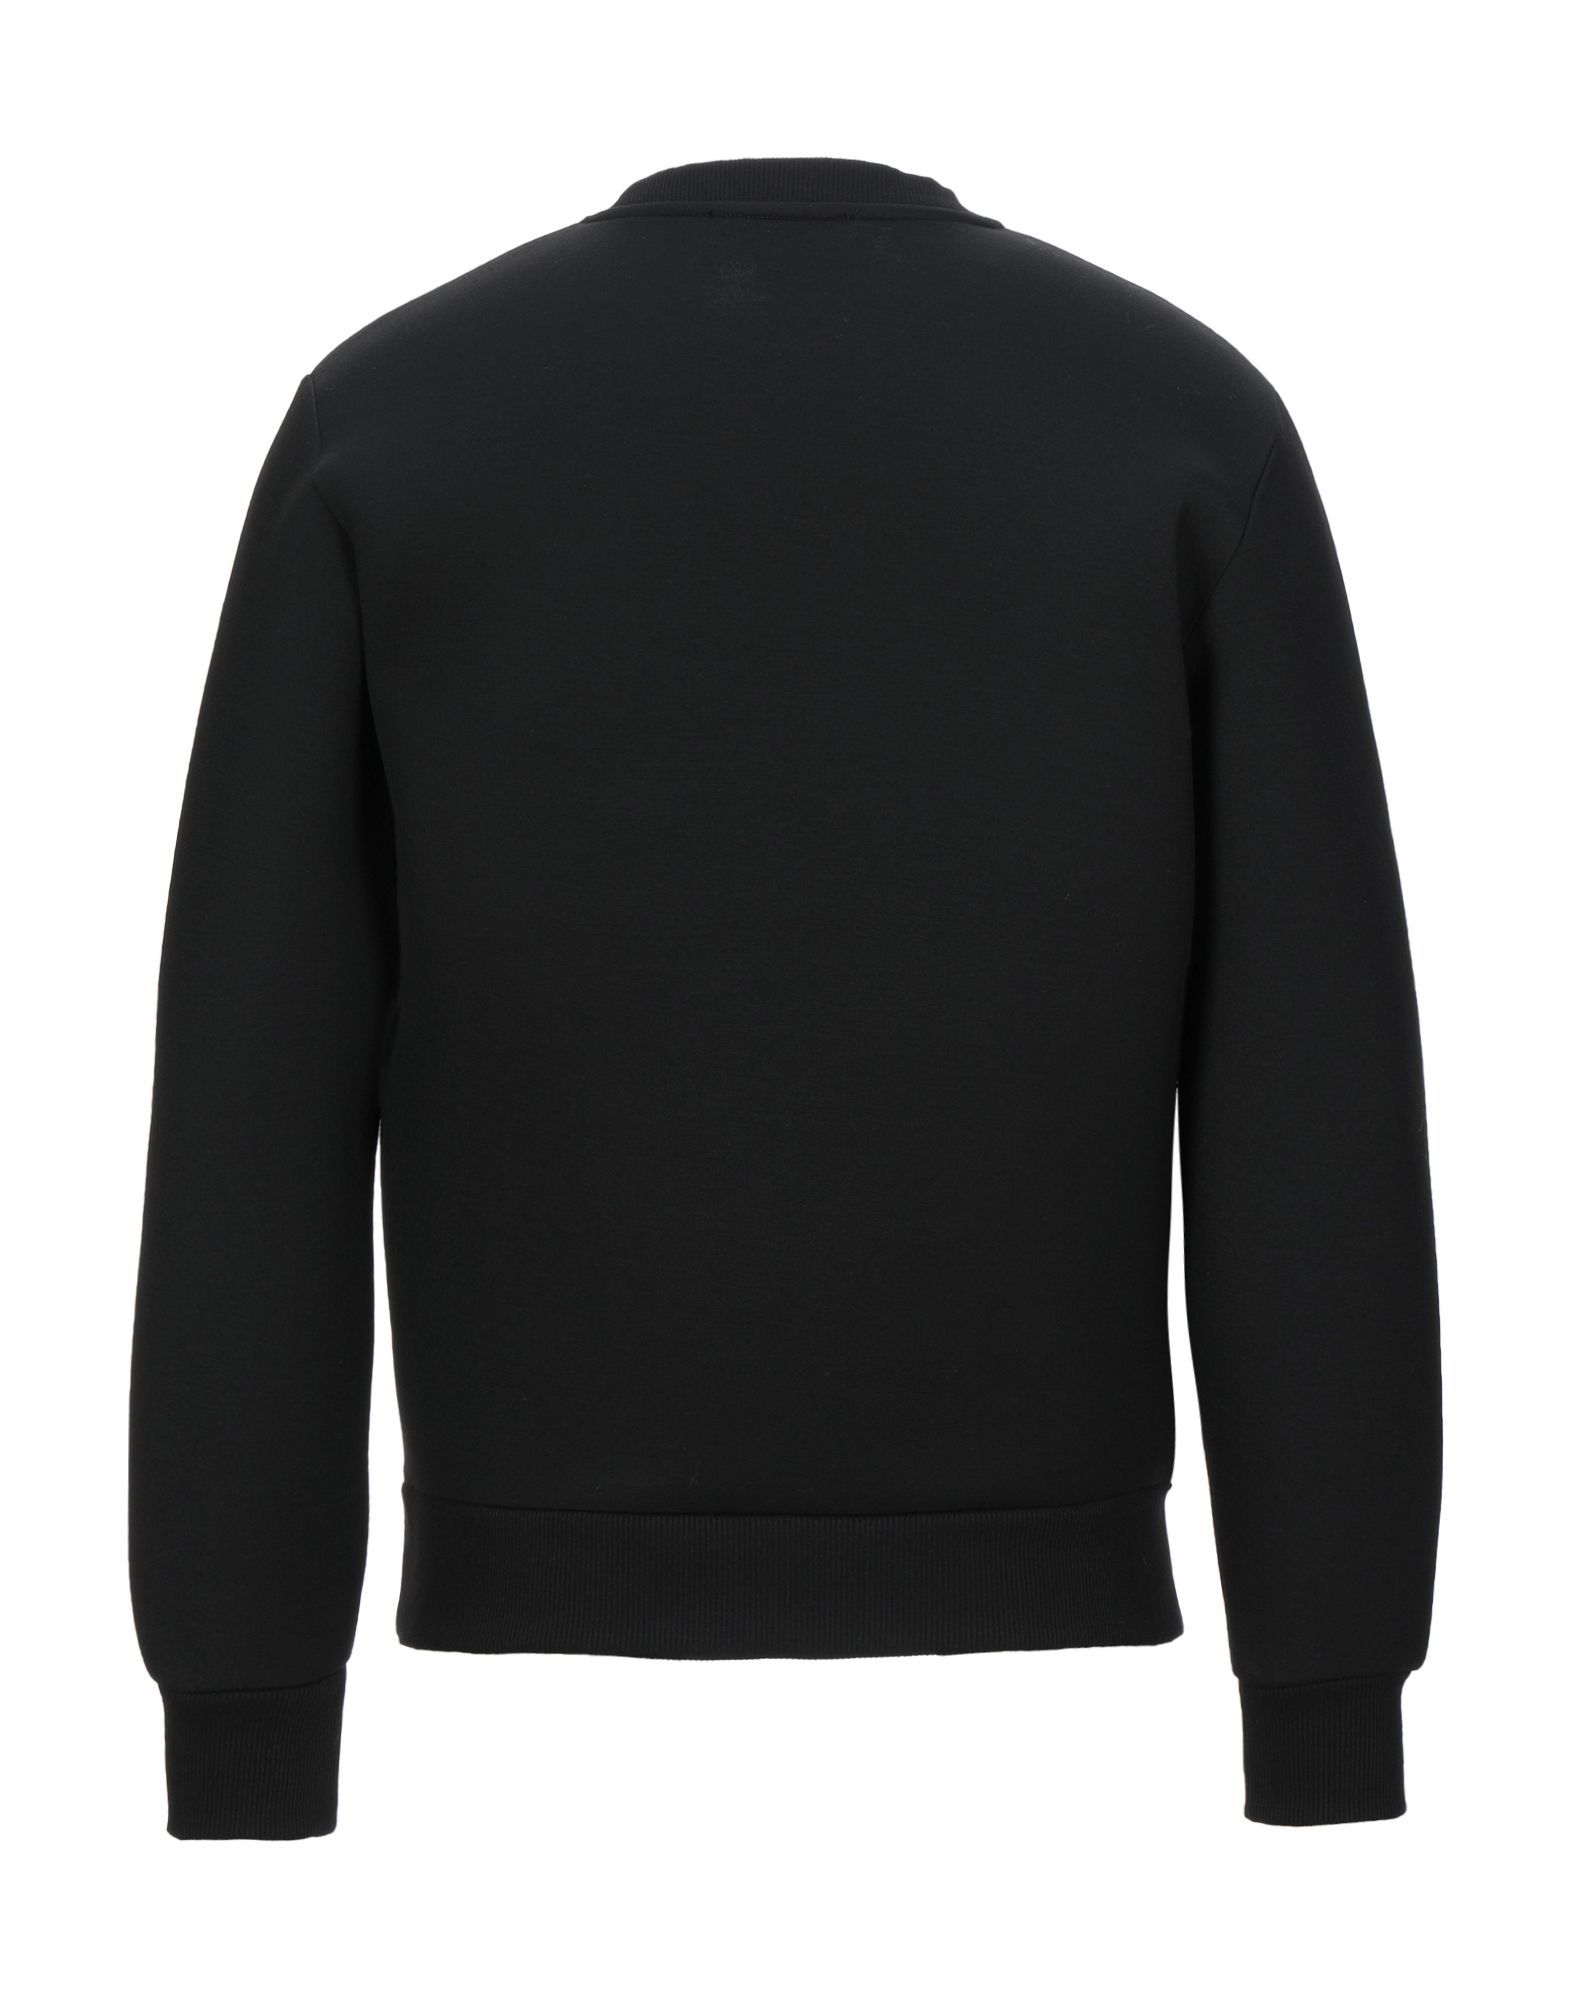 neoprene, contrasting applications, solid colour, round collar, long sleeves, no pockets